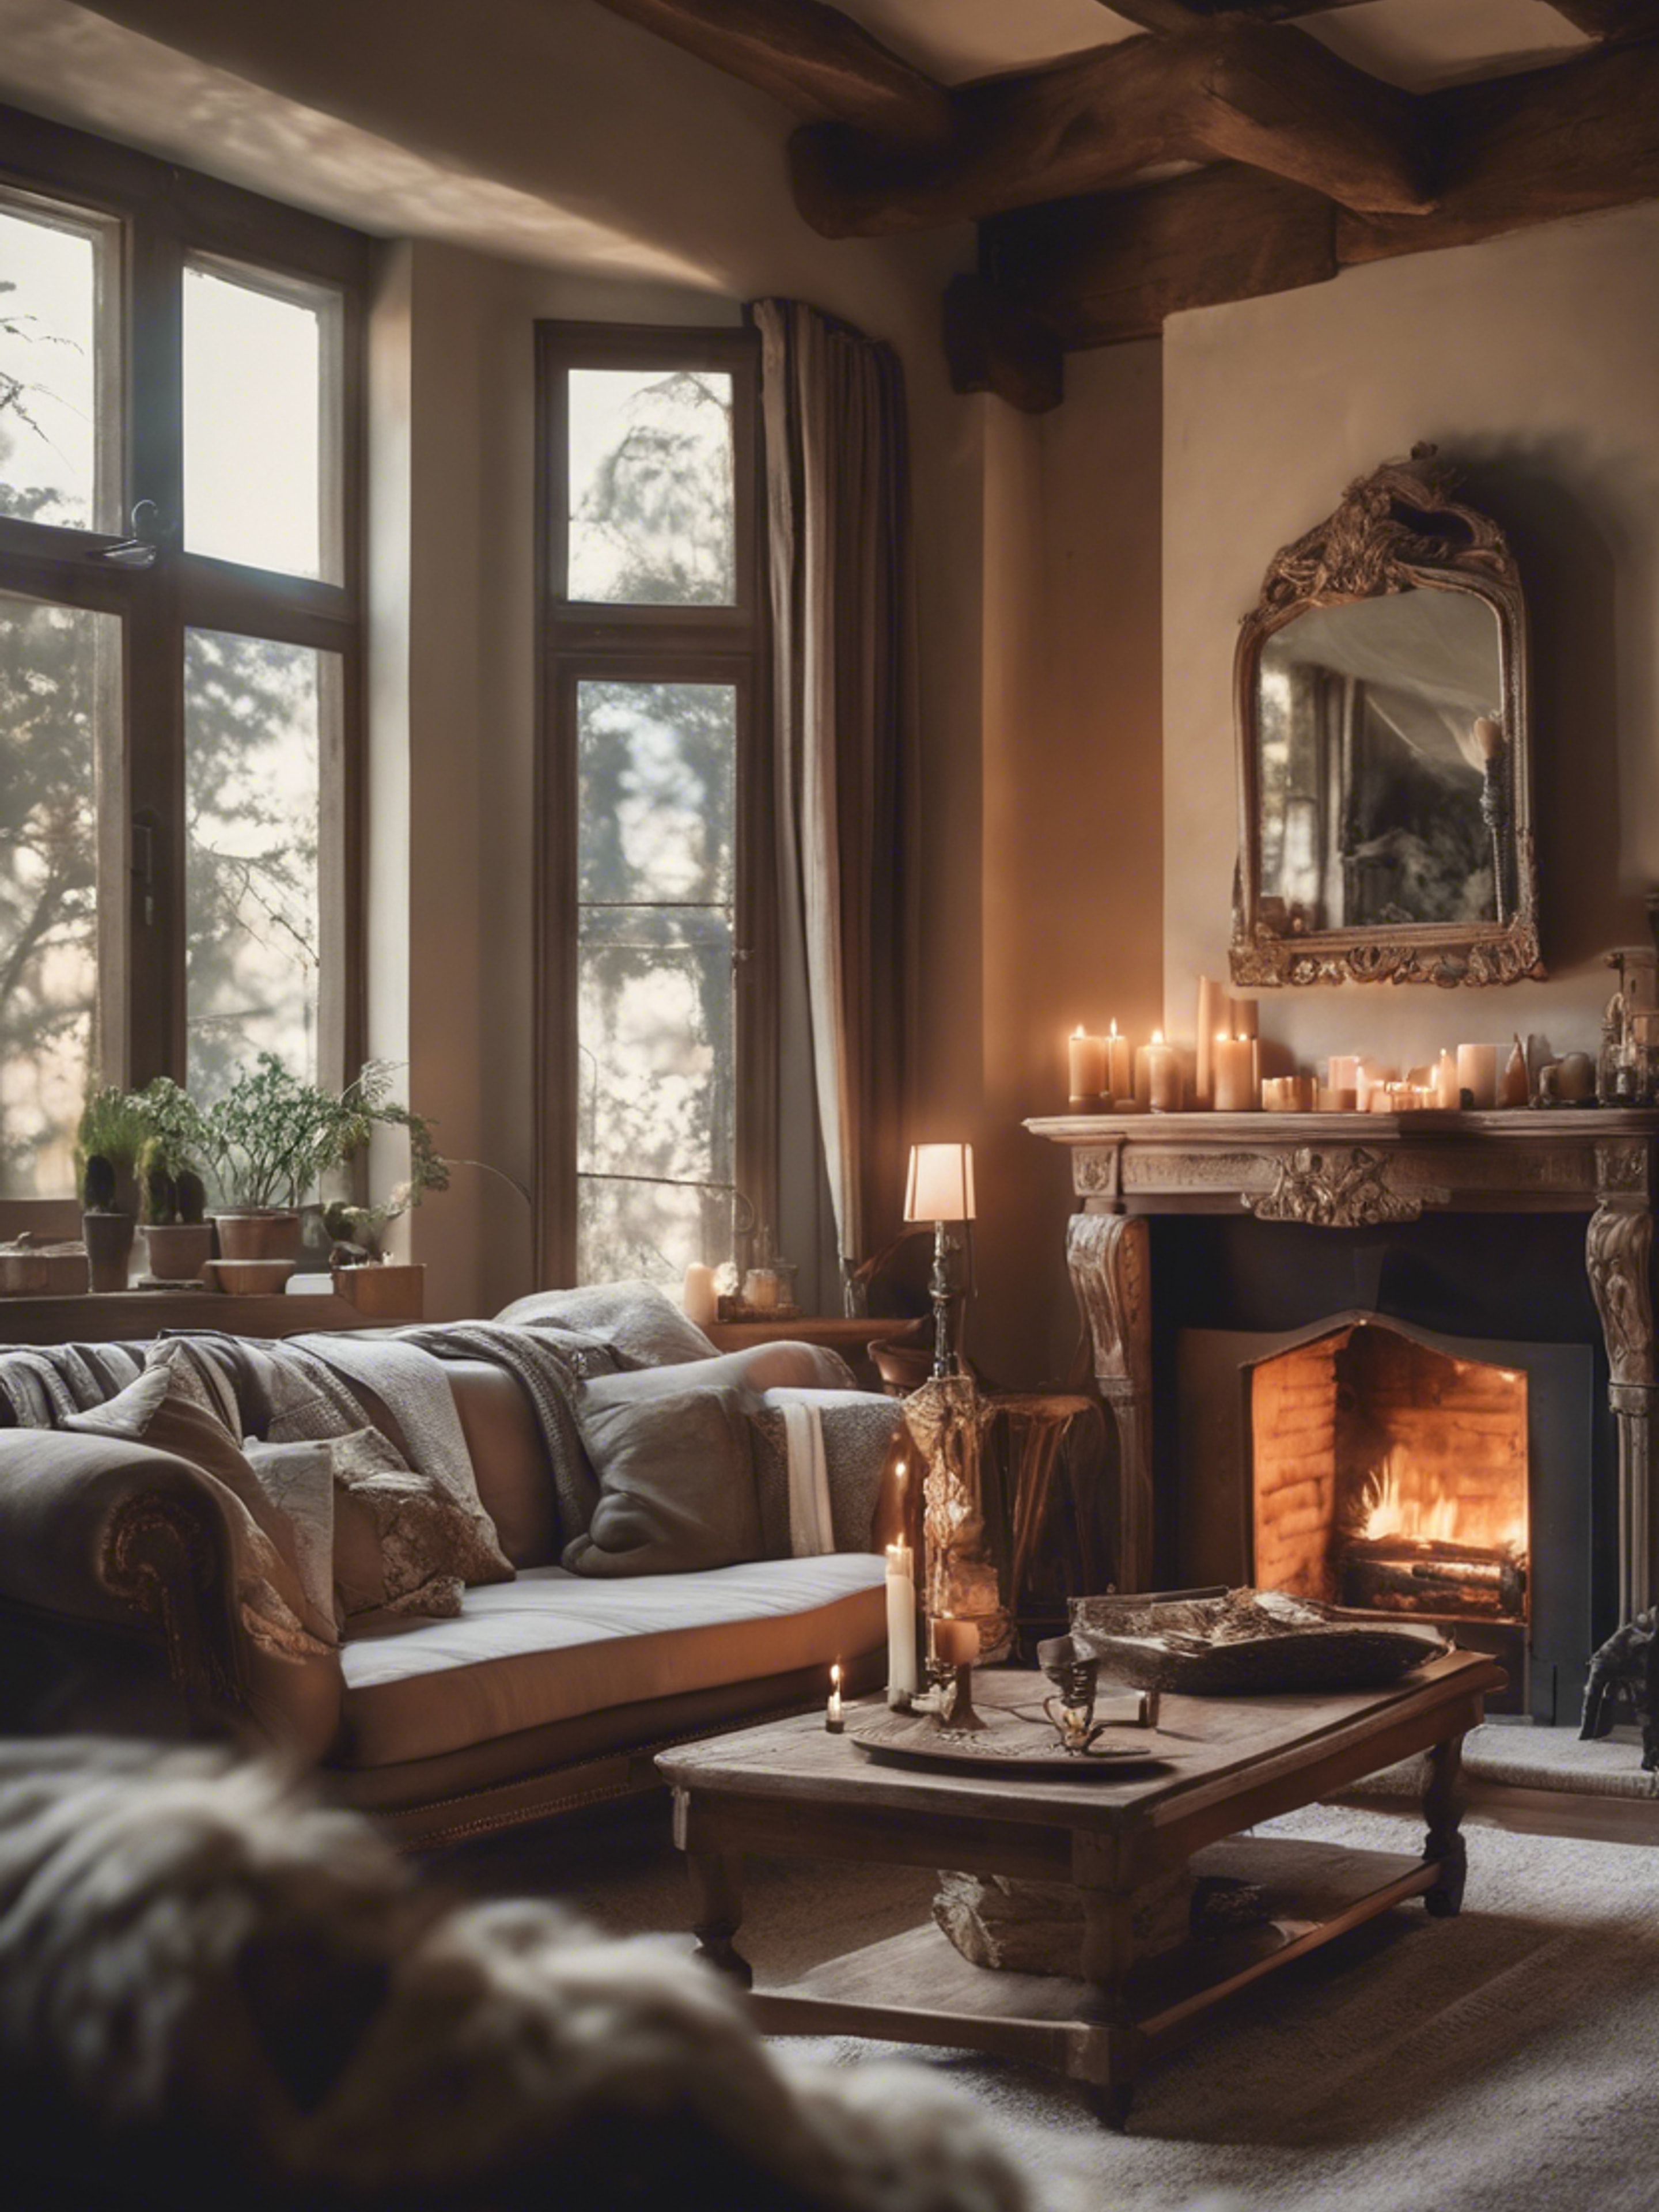 A French country style living room, cozy and comfortable with a roaring fireplace, antique furniture, and soft candlelight. Wallpaper[b1f658778f85425ba676]